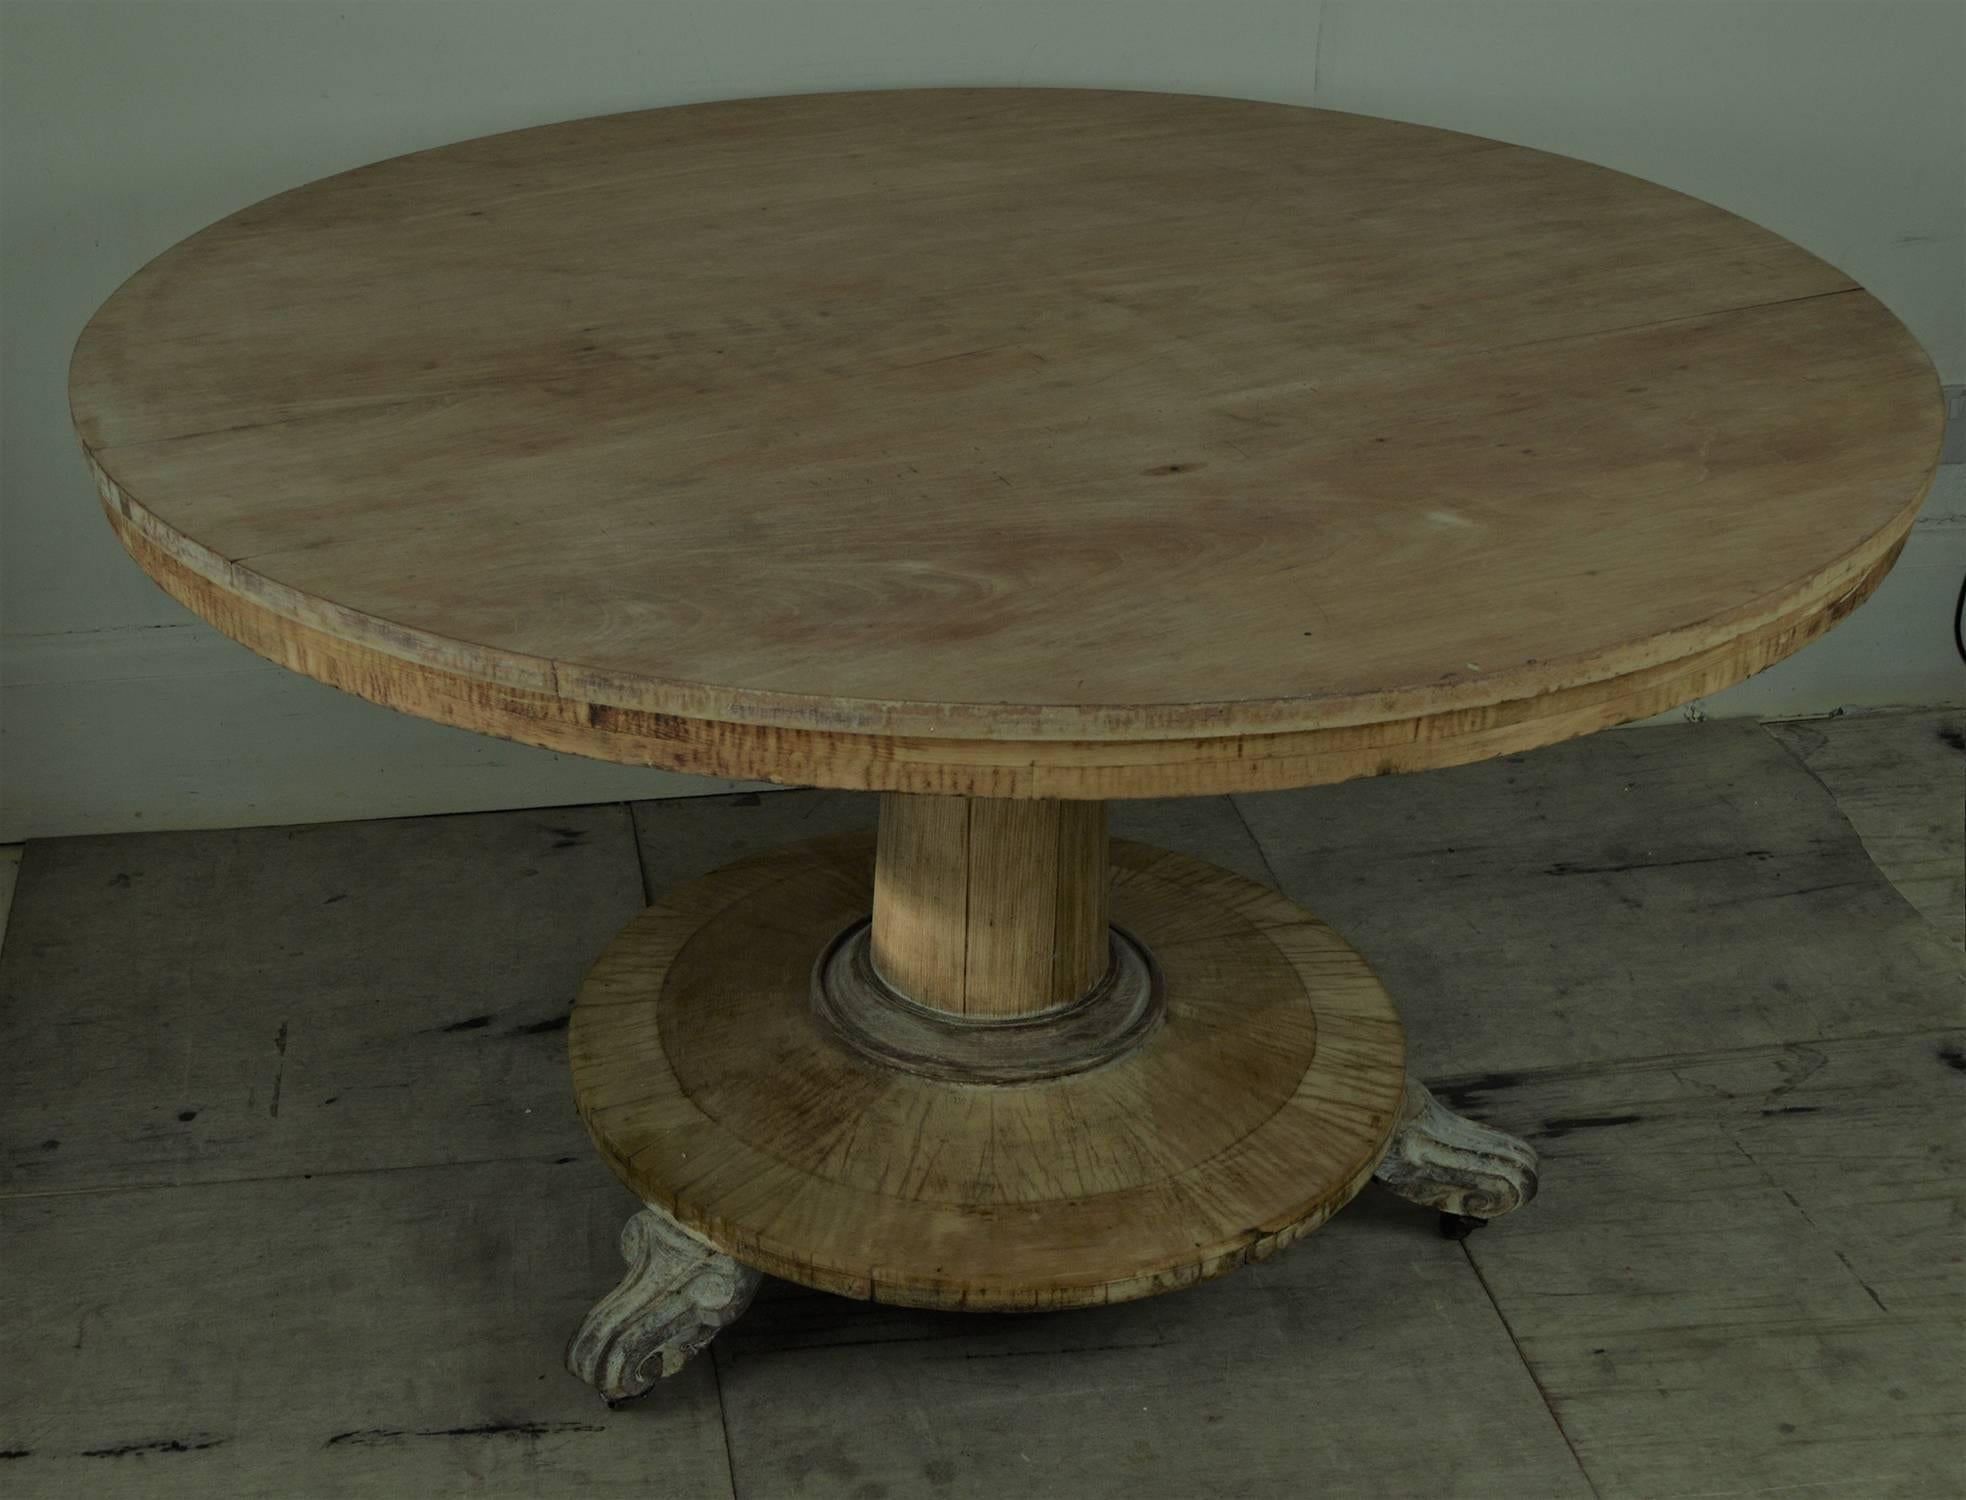 Wonderfully understated round dining or centre table made from four different types of wood.

Great simple lines.

The base and apron are pine. The carved feet are rosewood. The cylindrical pedestal support is ash and the top is bleached